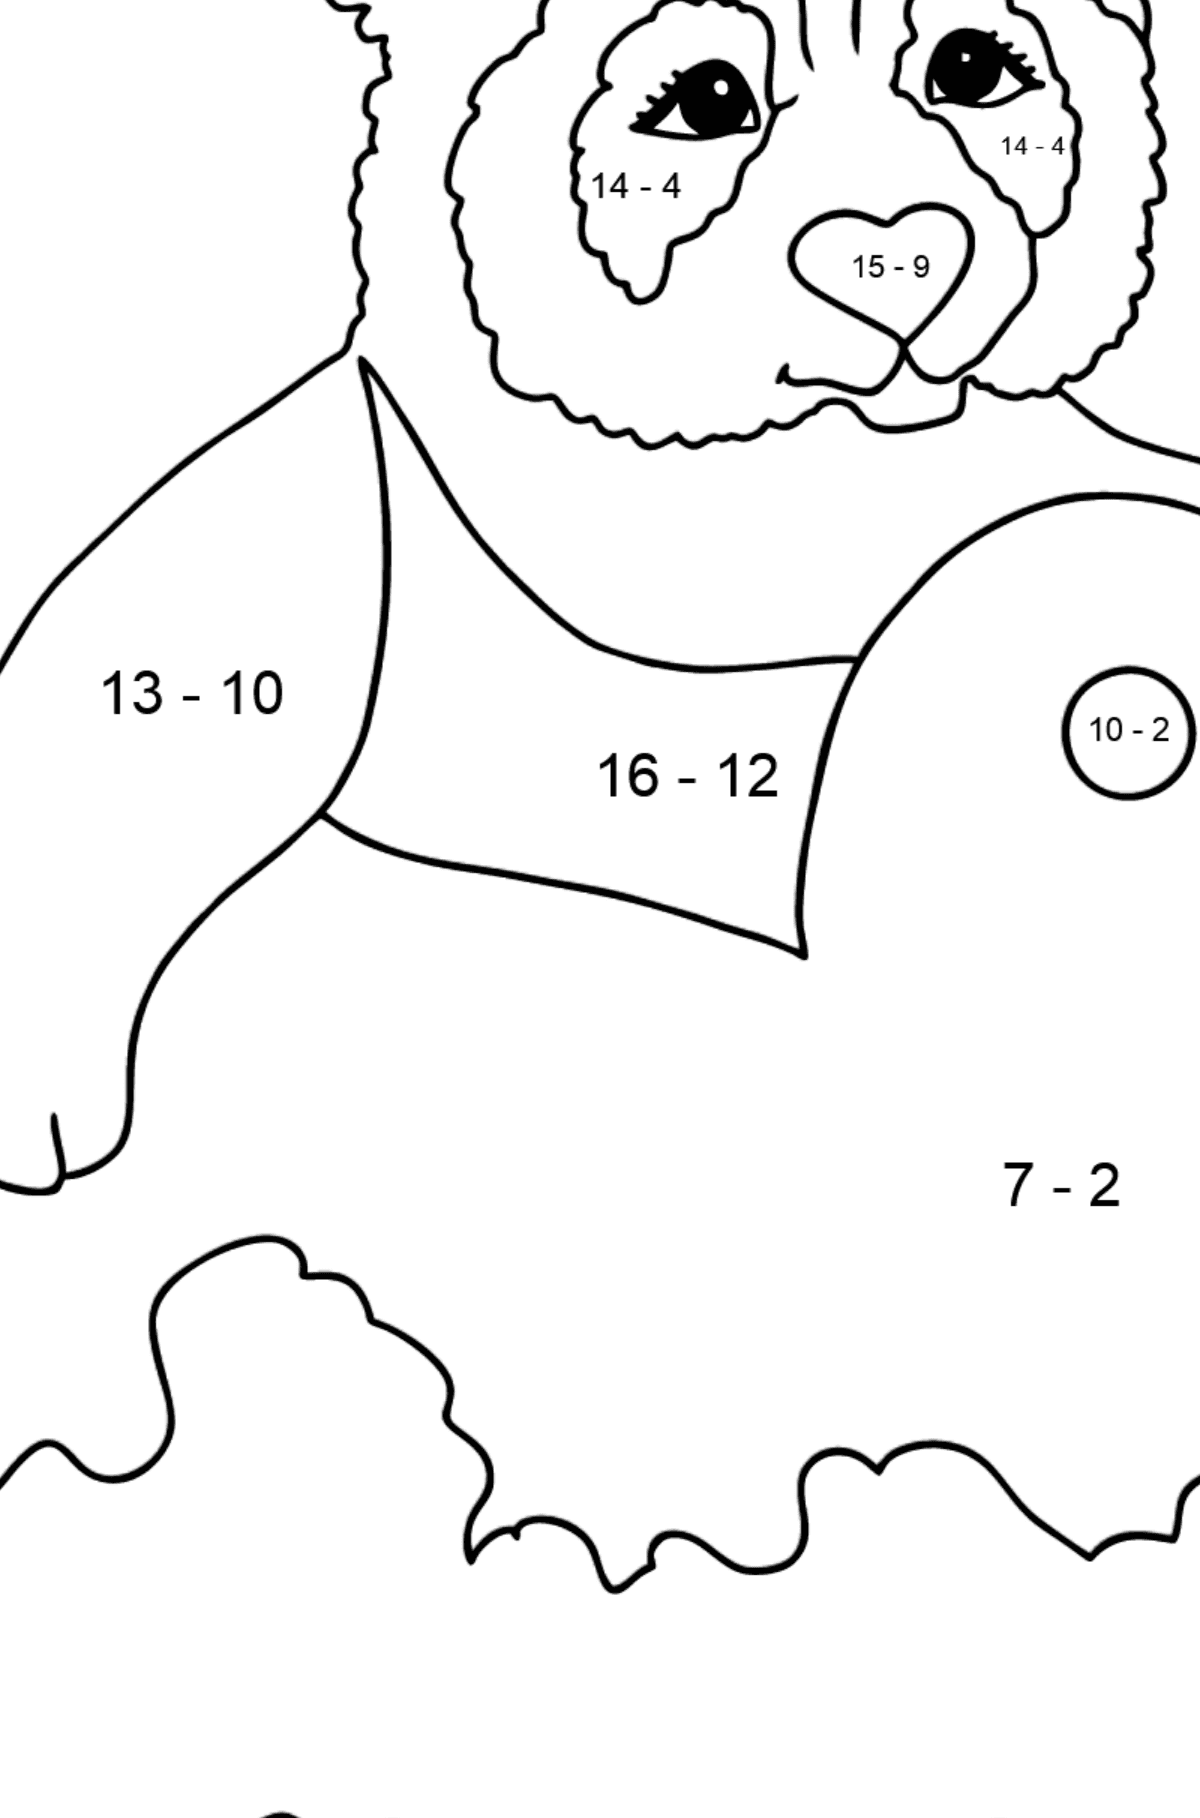 Amusing Panda (Simple) coloring page - Math Coloring - Subtraction for Kids